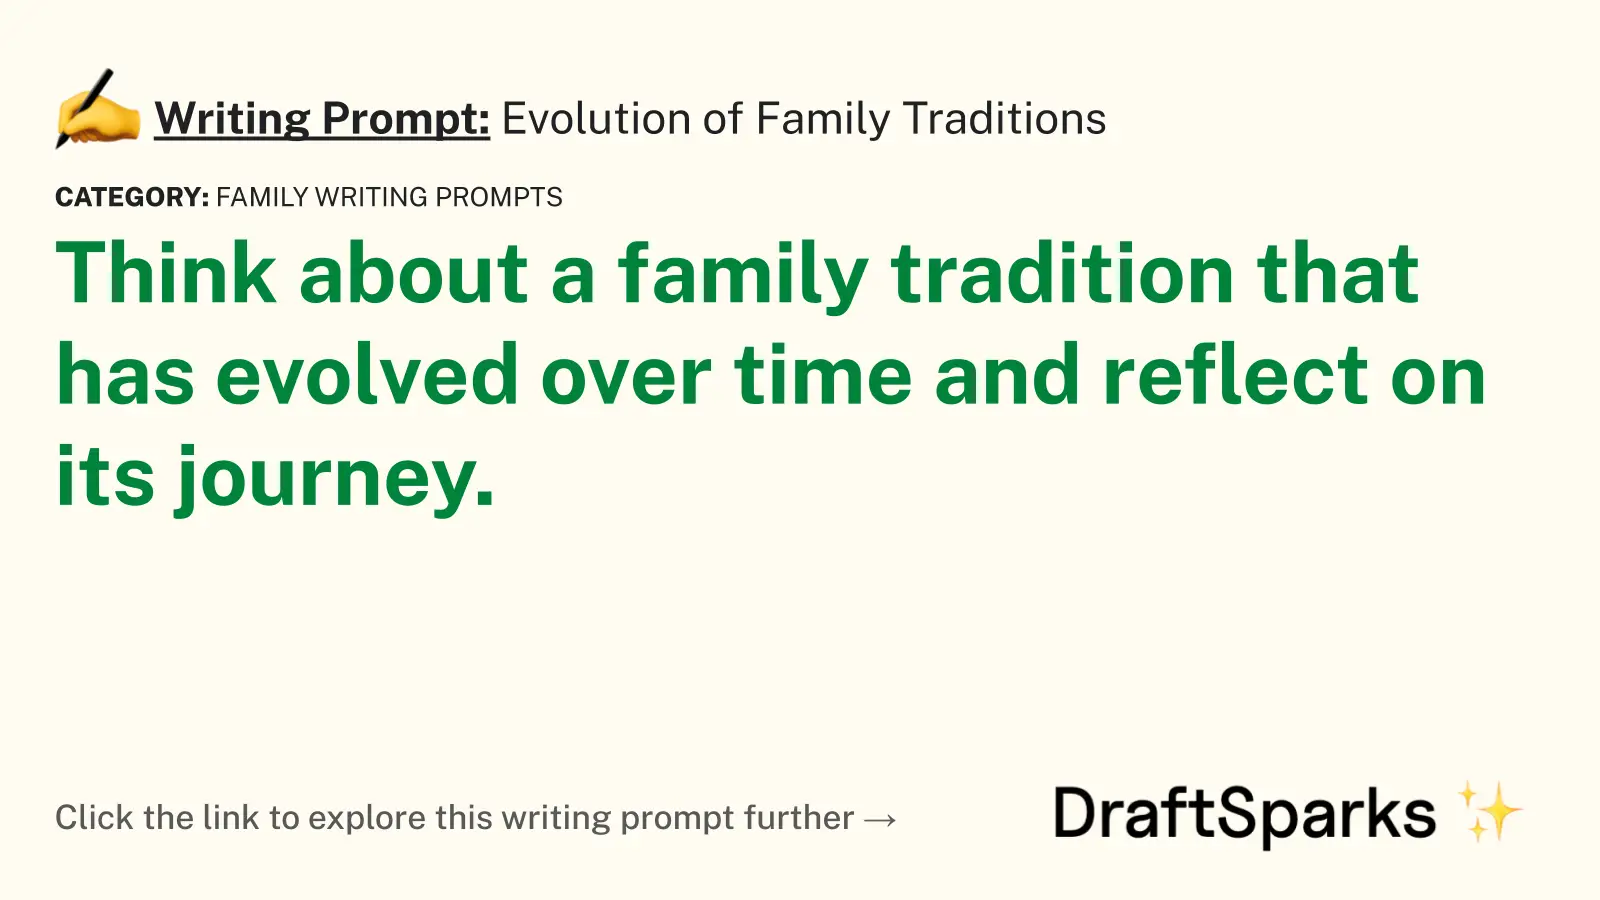 Evolution of Family Traditions